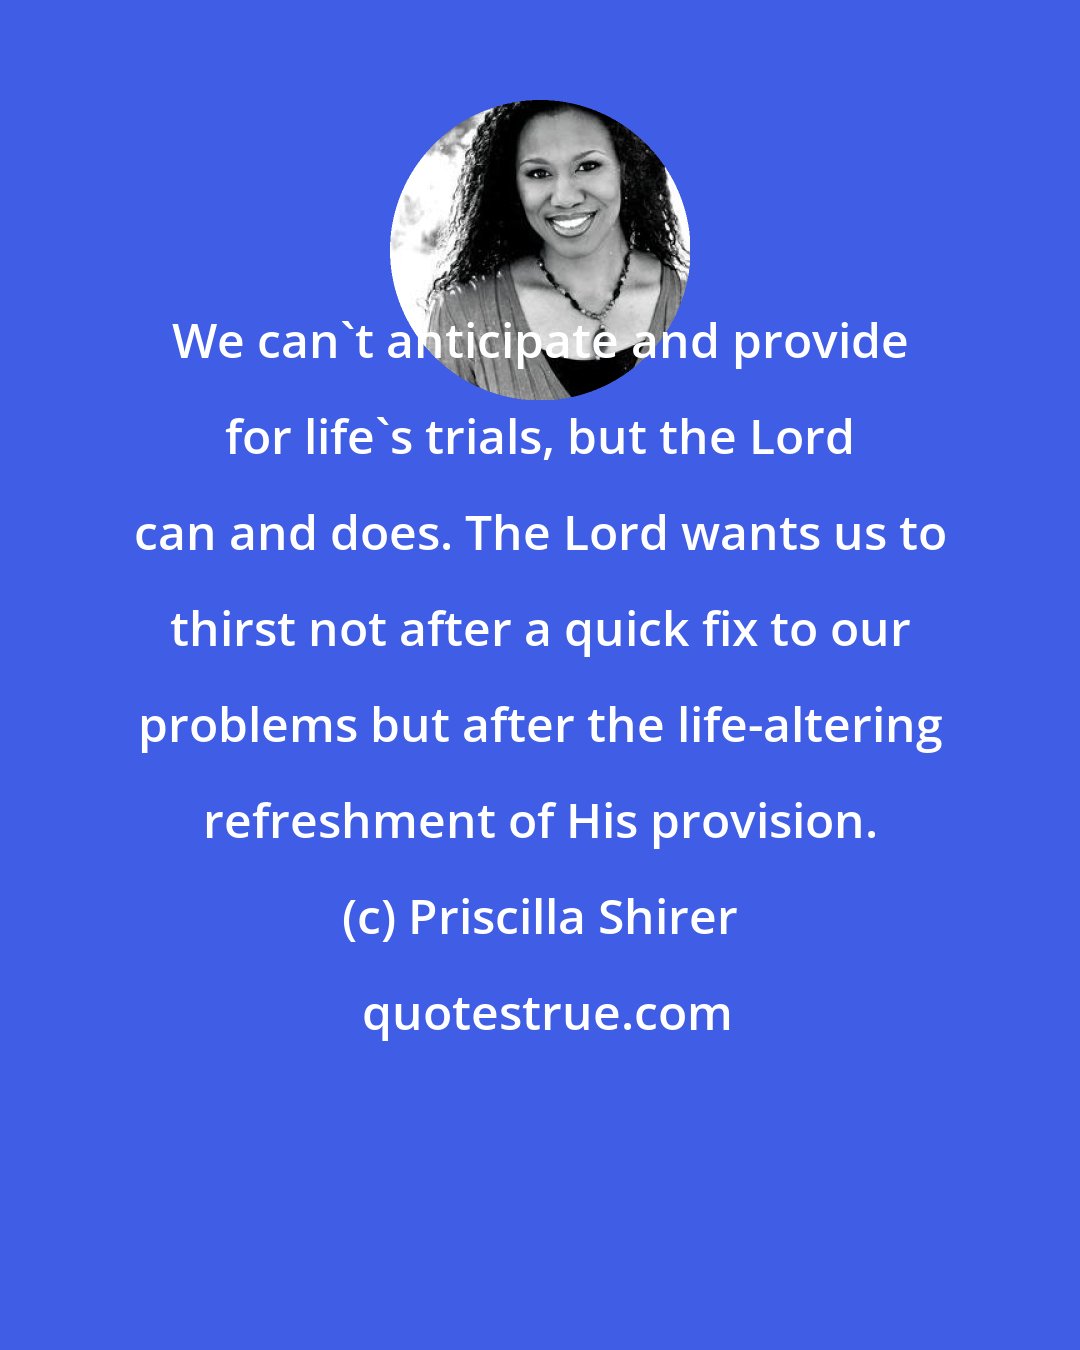 Priscilla Shirer: We can't anticipate and provide for life's trials, but the Lord can and does. The Lord wants us to thirst not after a quick fix to our problems but after the life-altering refreshment of His provision.